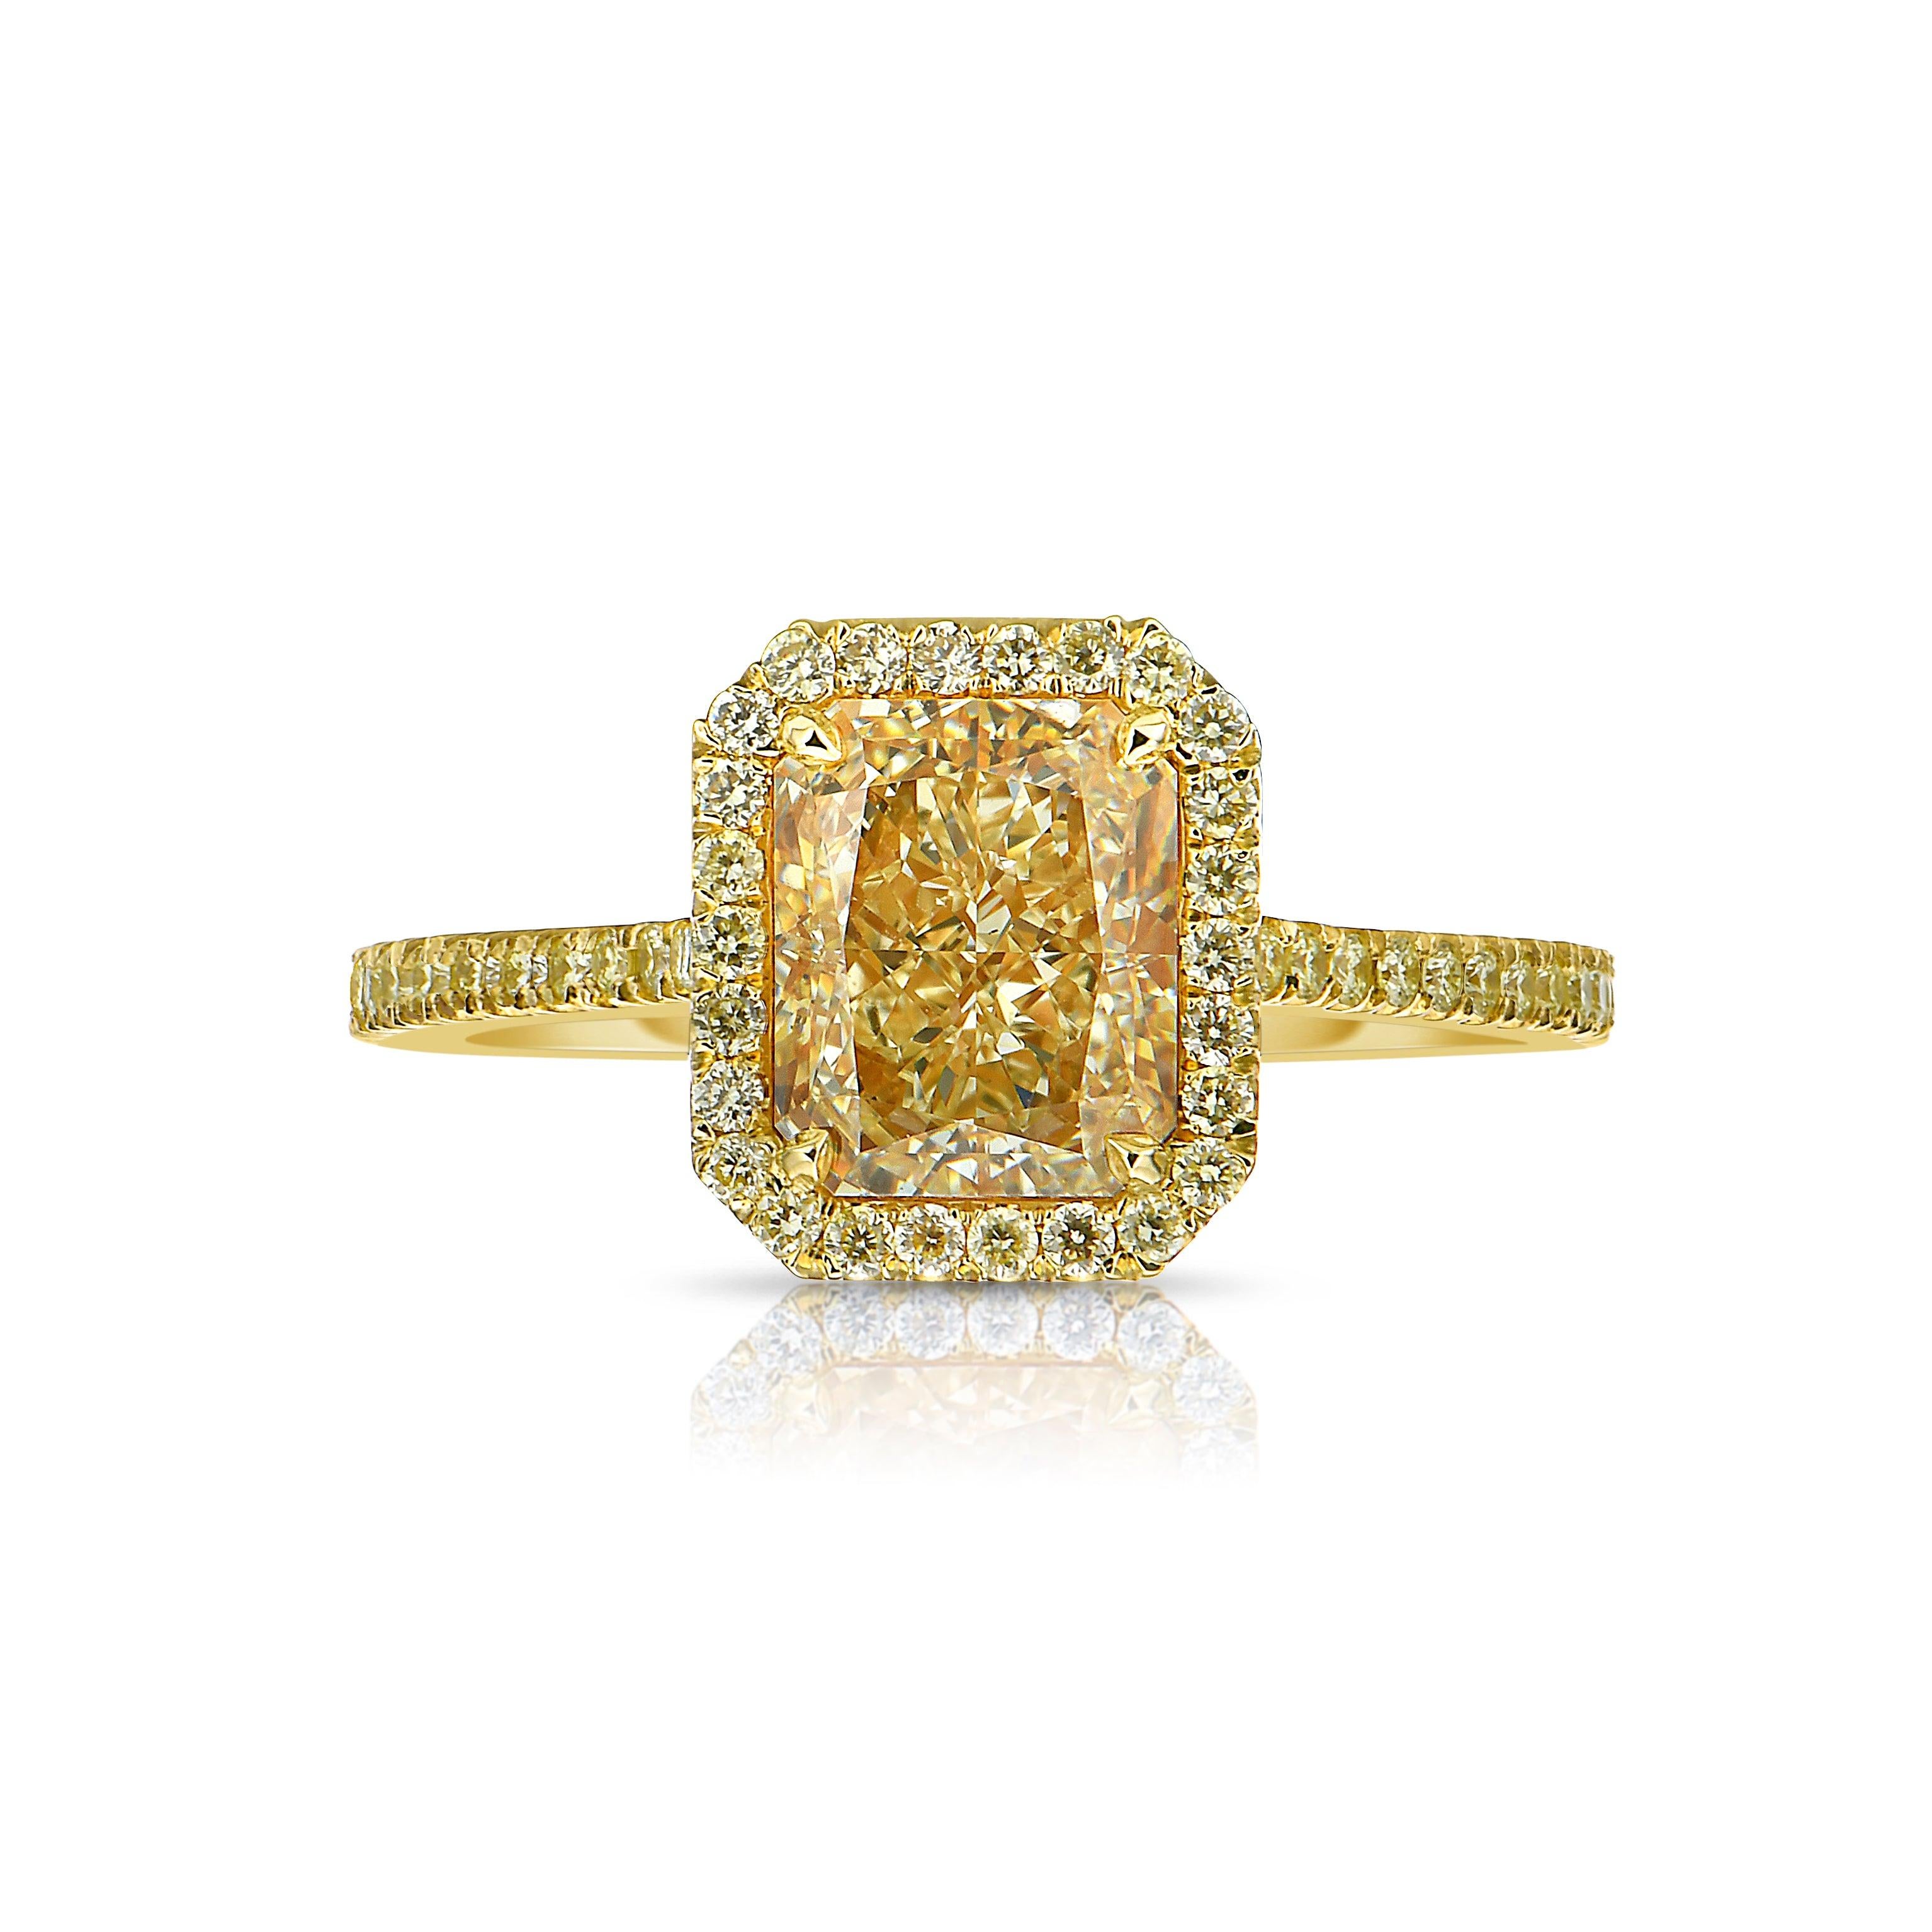 3.17 Carat diamond
Light Yellow (W-X)
0.37 Carats of Yellow Rounds 
VVS2 Clarity 
Elongated Radiant Cut Diamond
Excellent and Very Good Cutting
Set in 18k Yellow Gold 
Handmade in NYC
GIA certified diamond 

This piece can be viewed before purchase